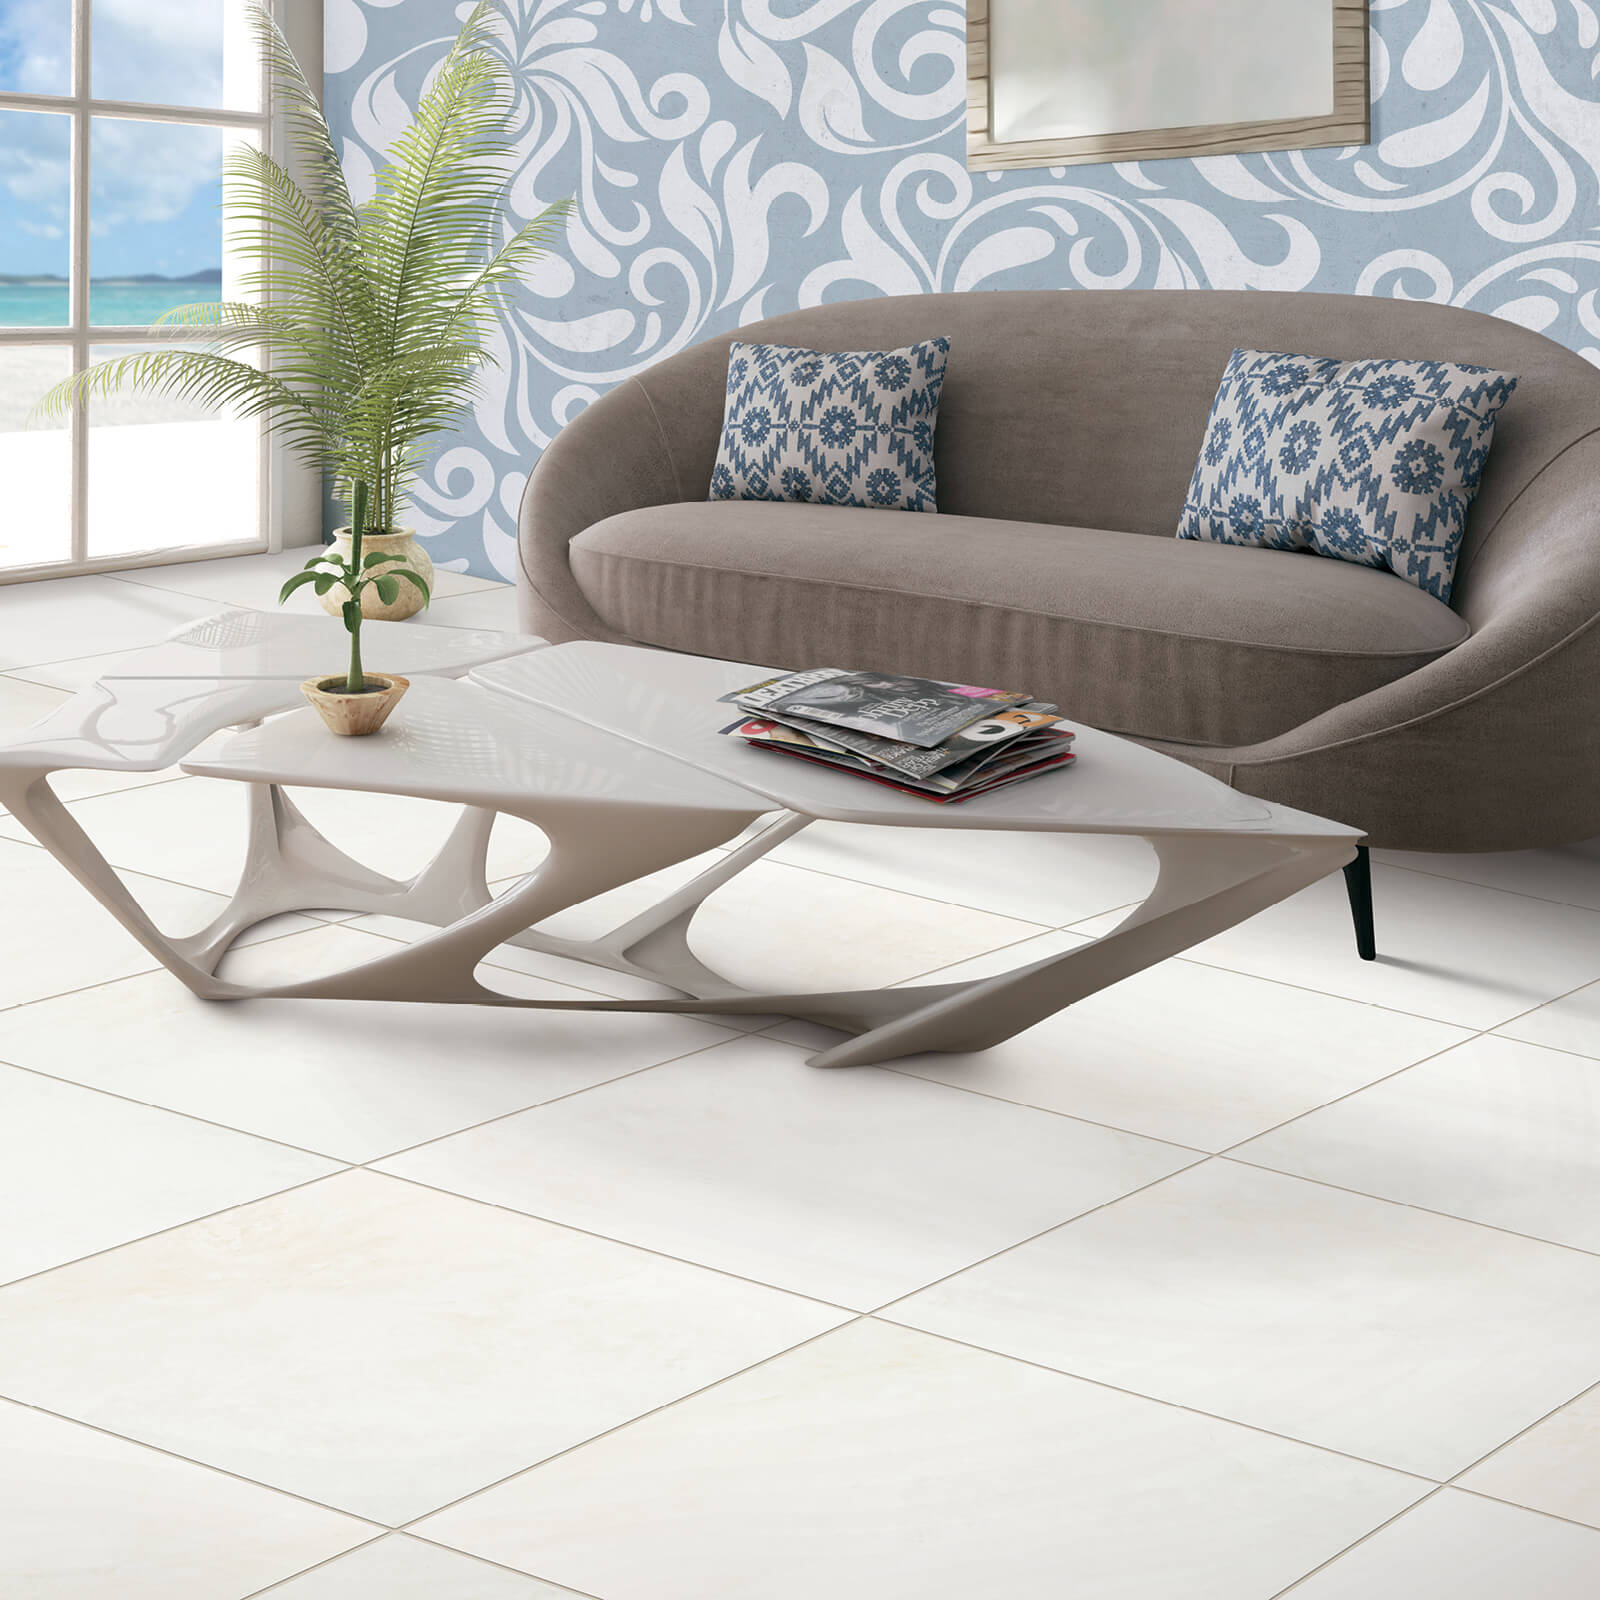 Tile flooring for living room | The L&L Company